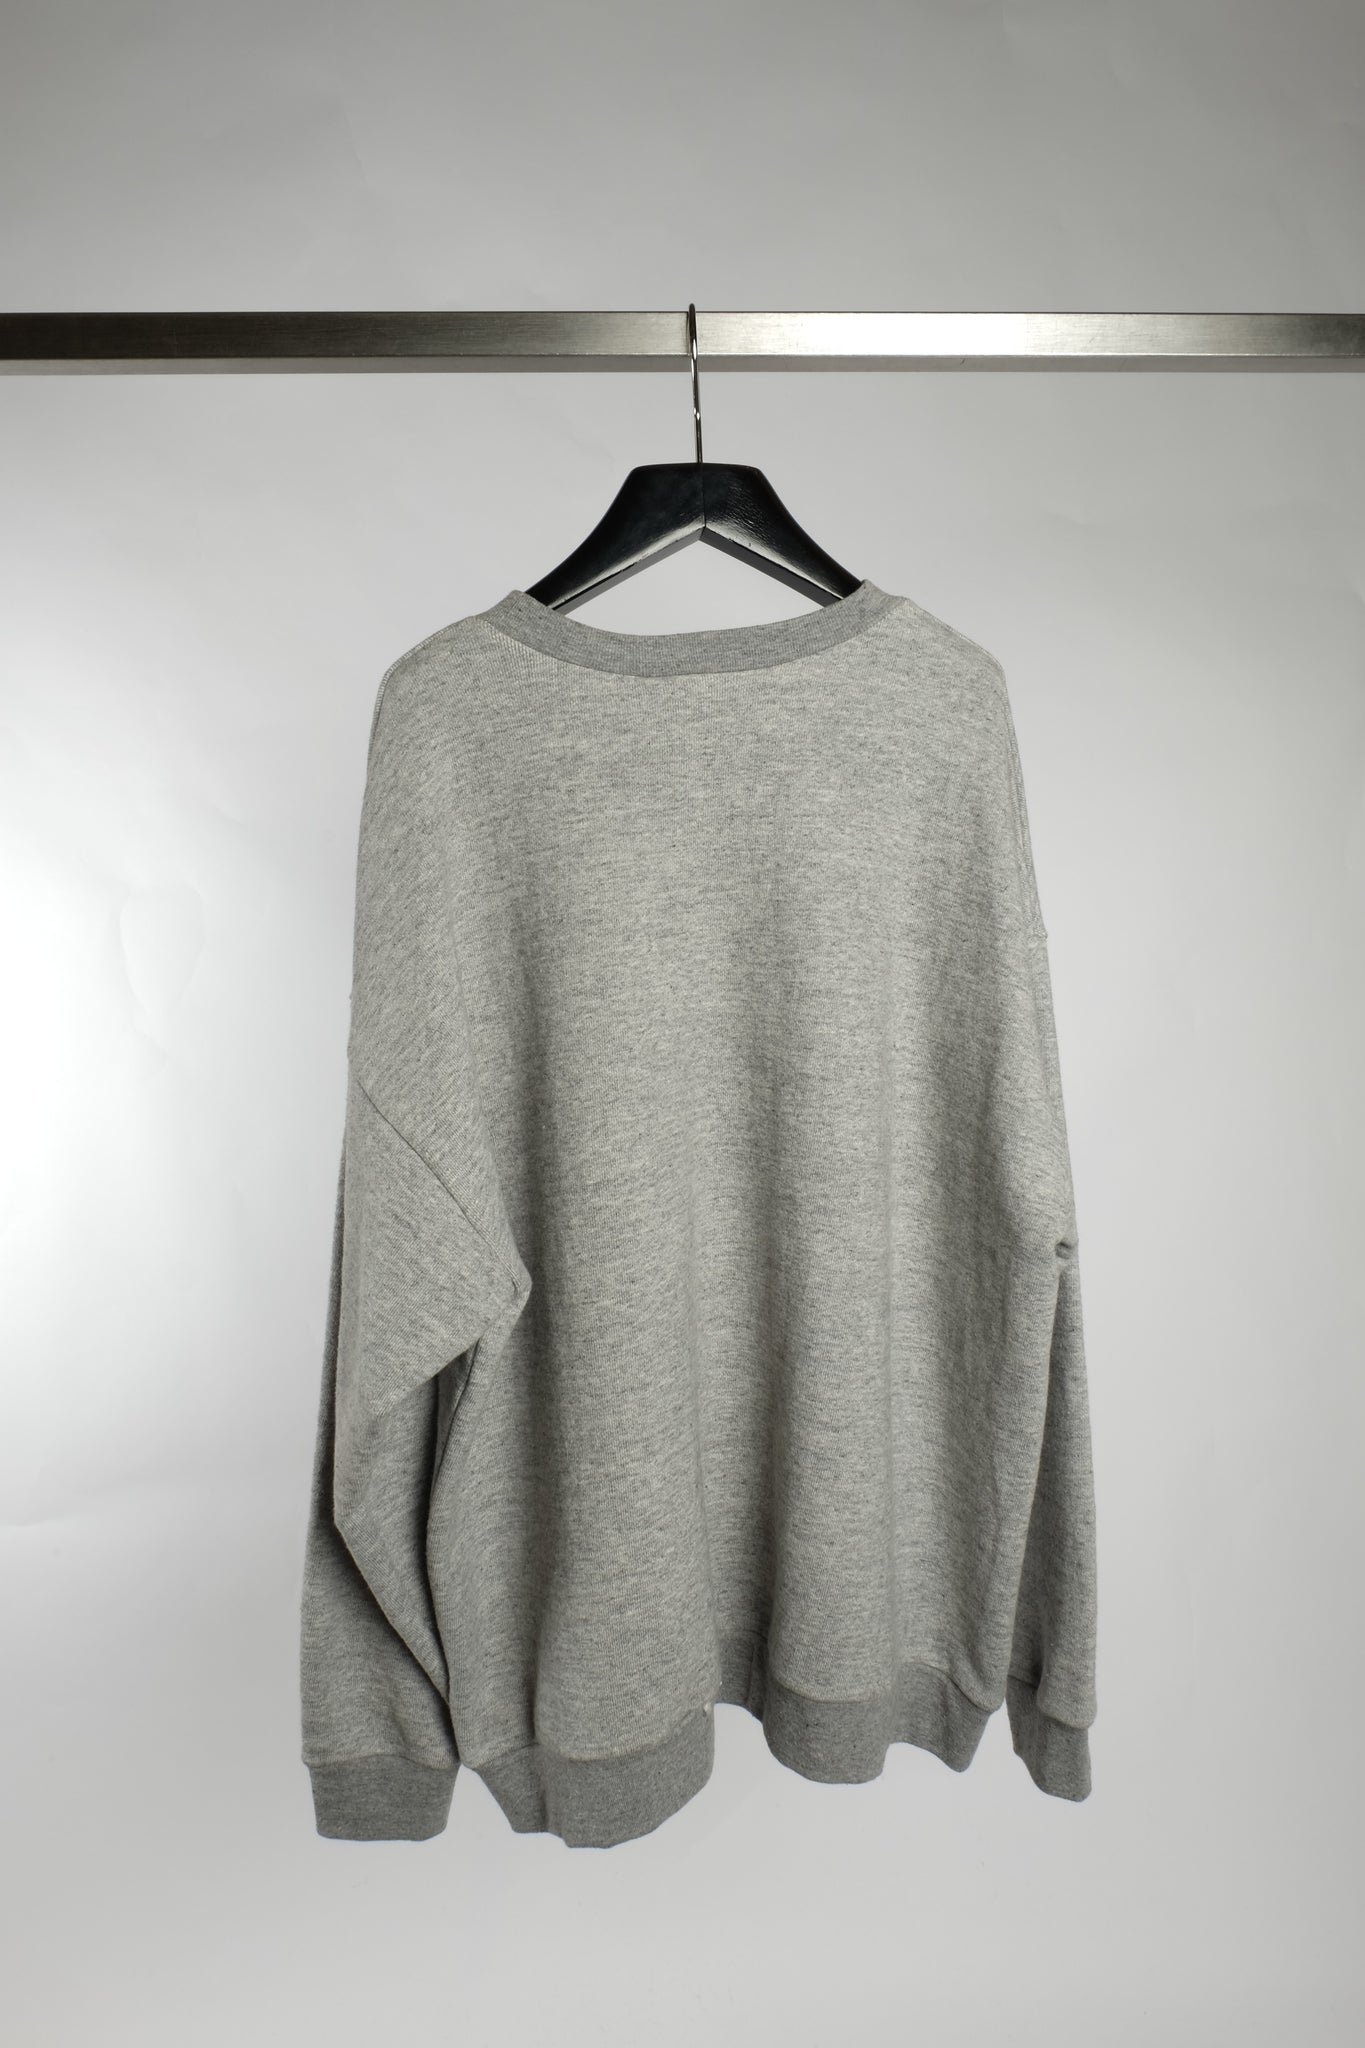 CLASSIC UNISEX SWEATER JAPANESE JERSEY IN GREY